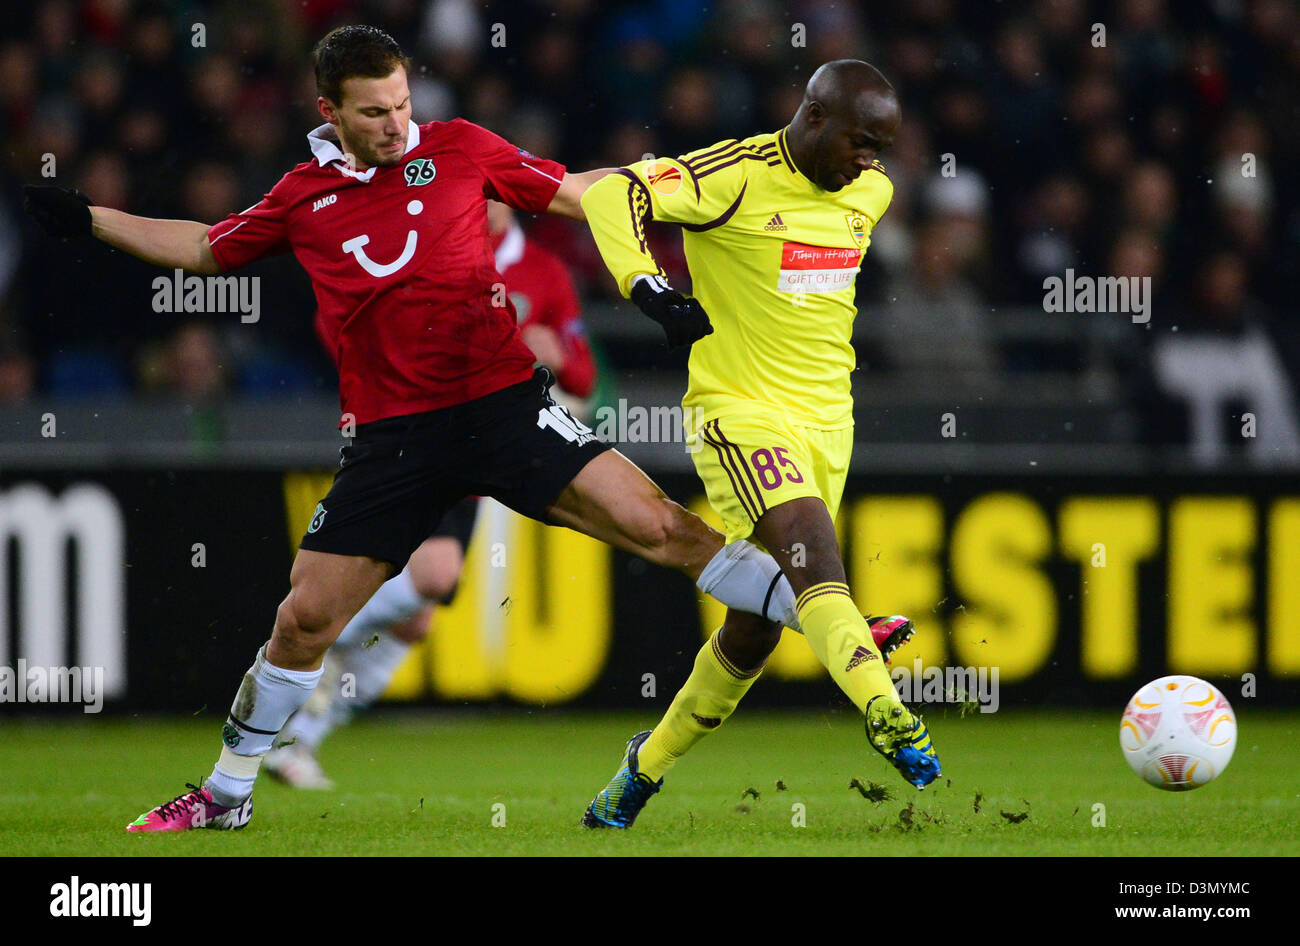 Hanover's Szabolcs Huszti (l) and Lassana Diarra of Makhachkala vie for the ball during the UEFA Europa League round of 32 second leg soccer match between Hanover 96 and FC Anzhi Makhachkala at Hannover Arena in Hanover, Germany, 21 February 2013. Photo: Peter Steffen/dpa +++(c) dpa - Bildfunk+++ Stock Photo